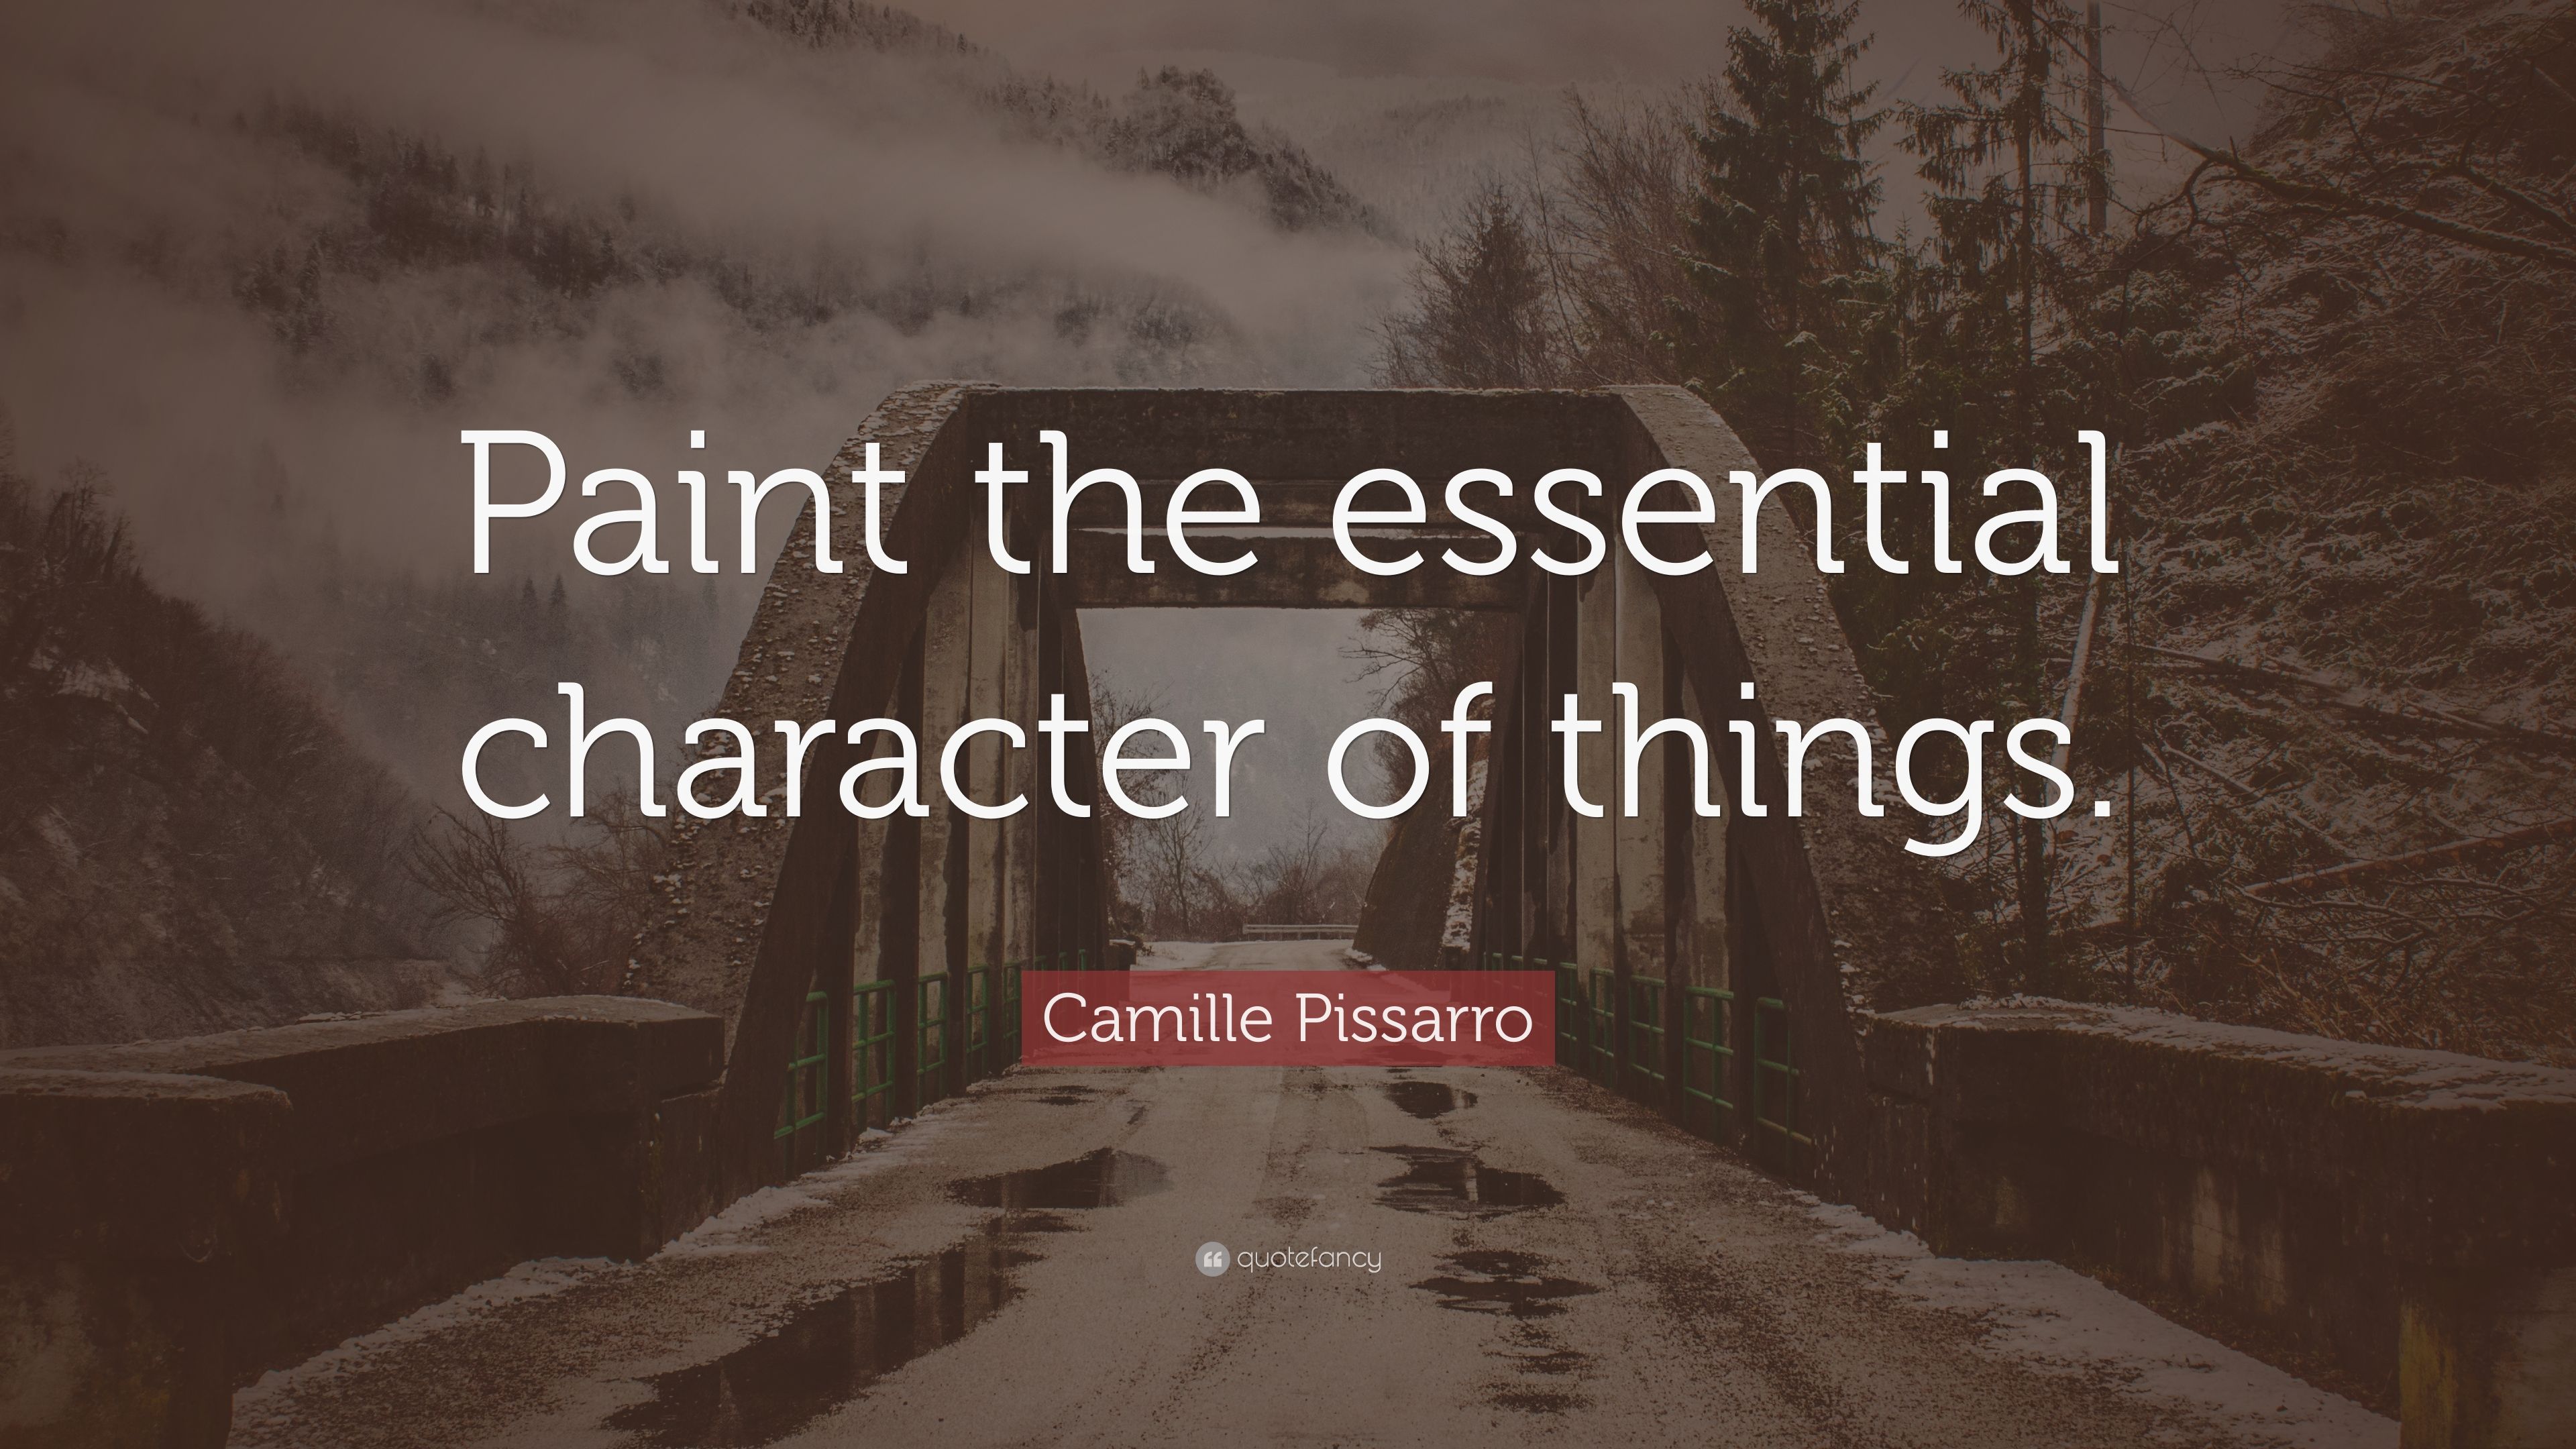 Camille Pissarro Quote: “Paint the essential character of things.” (10 wallpaper)